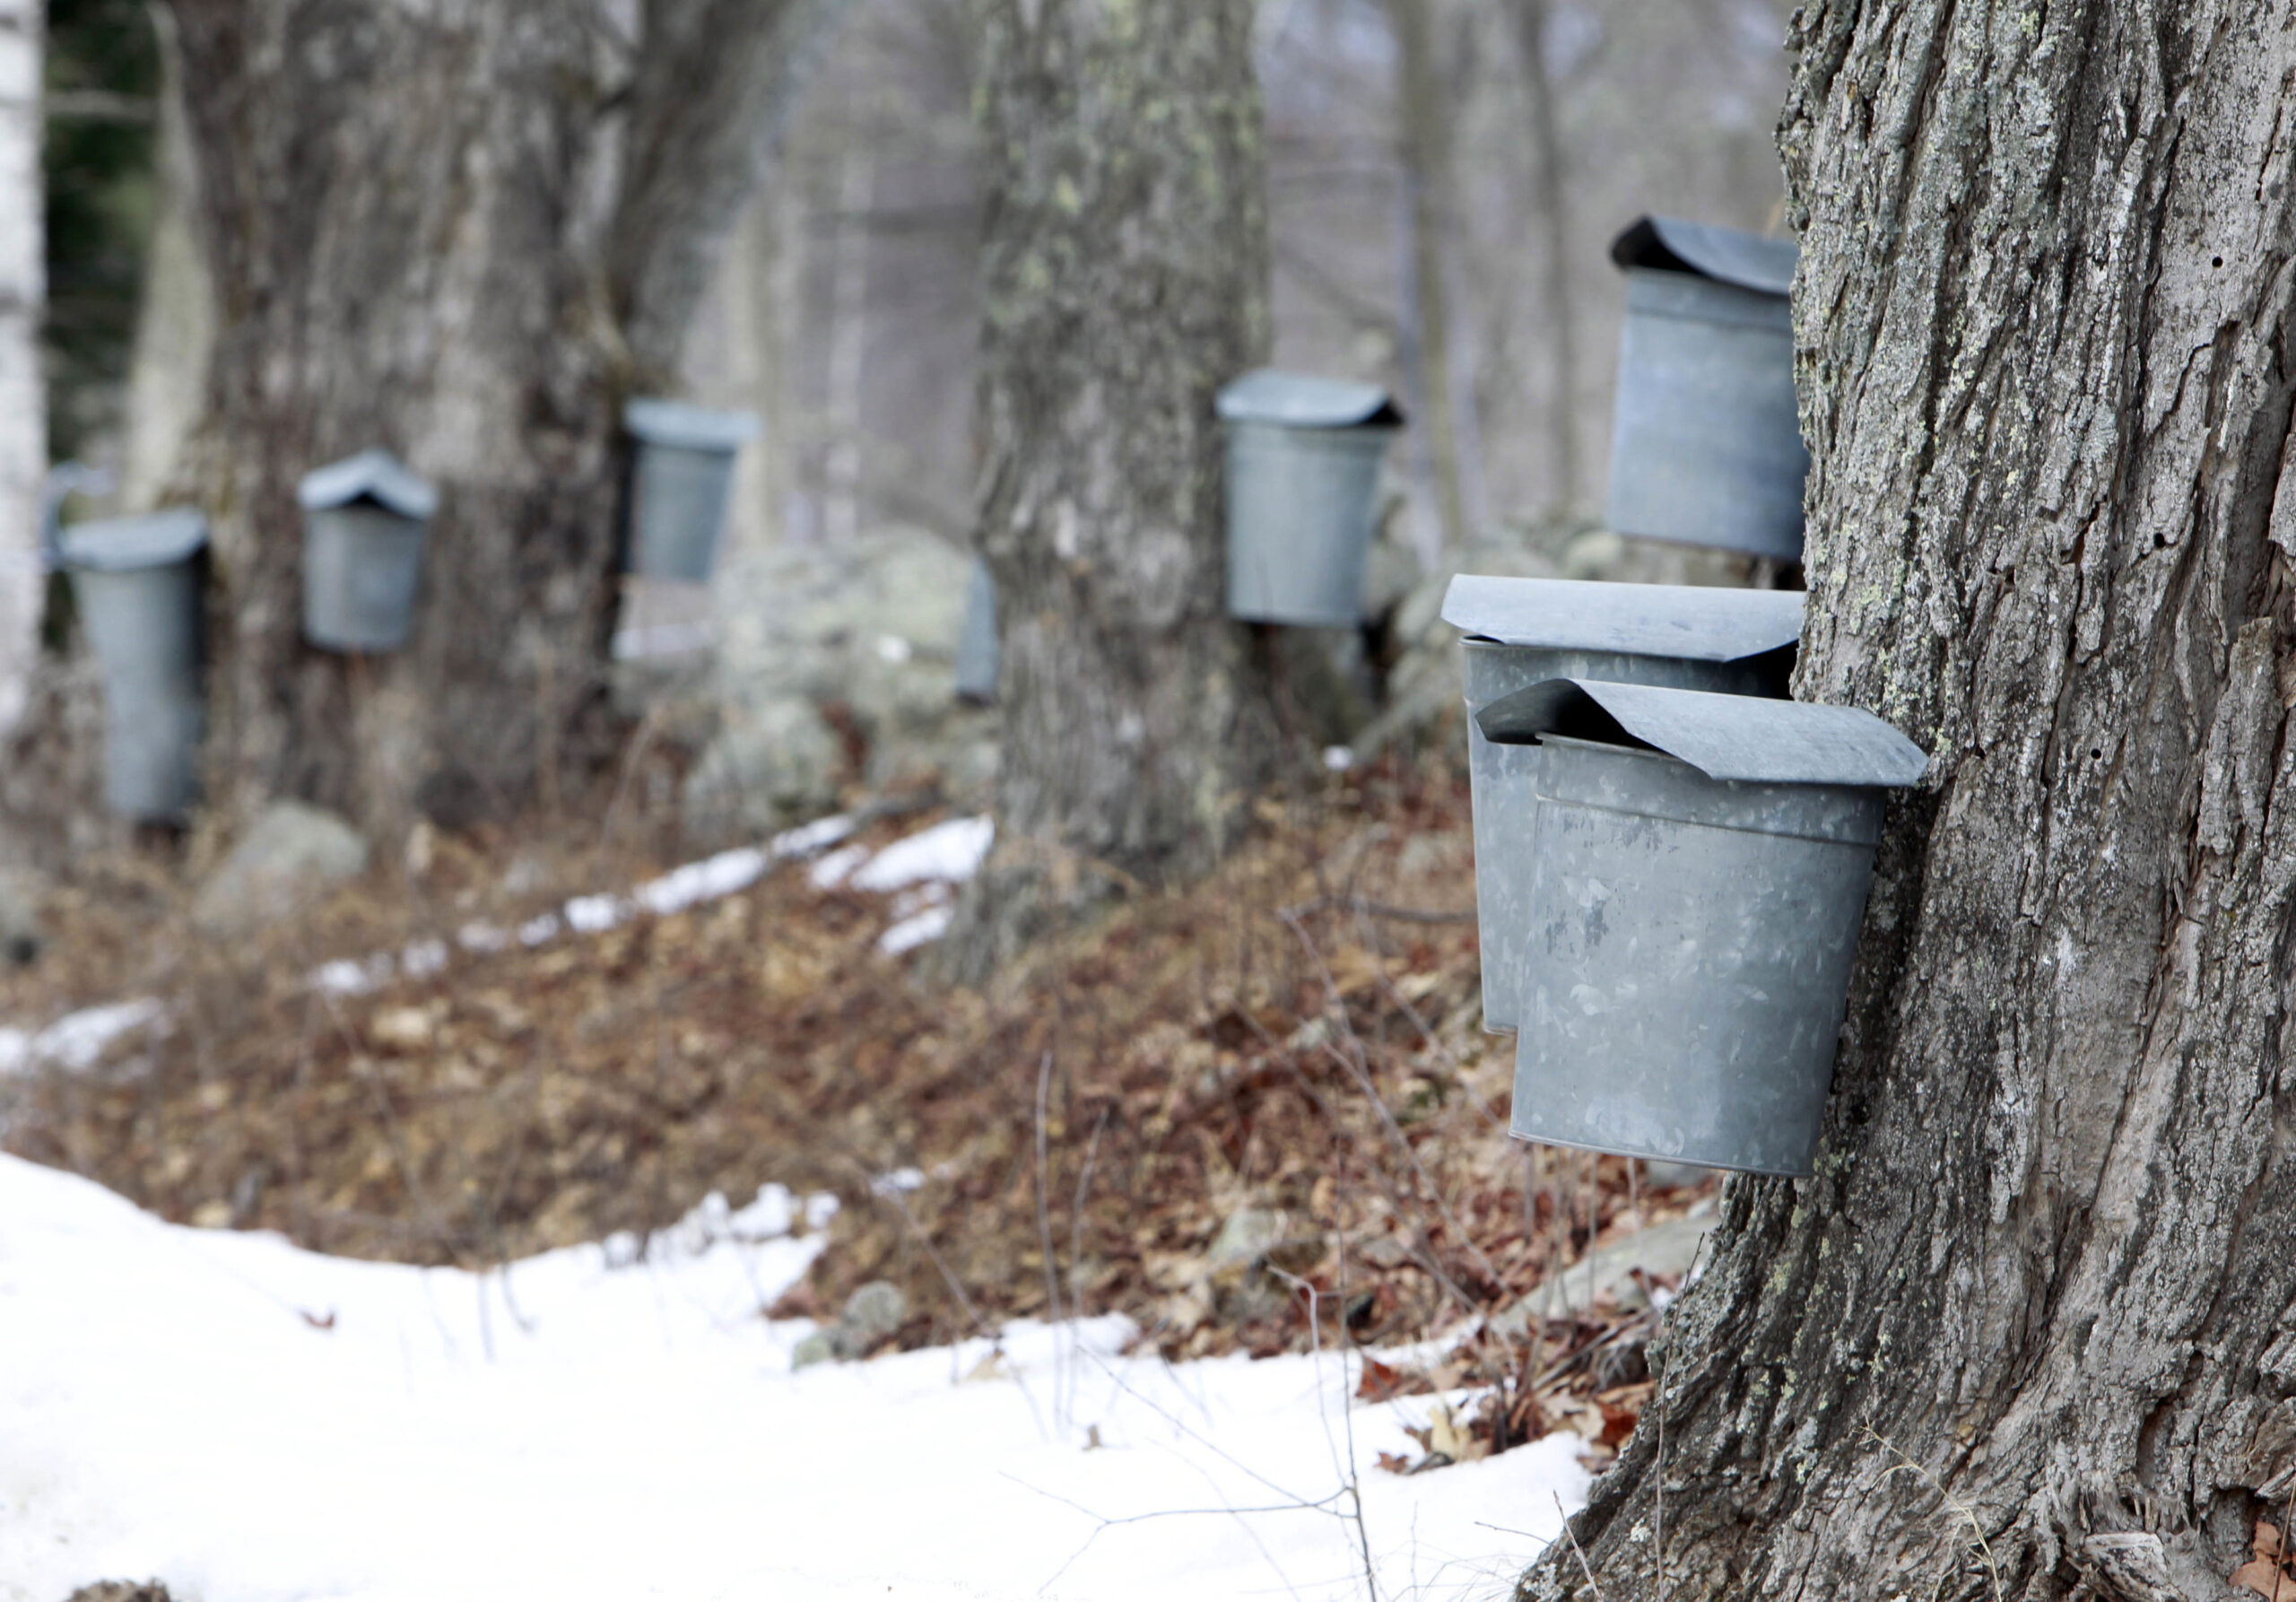 Maple tapping season begins earlier than usual